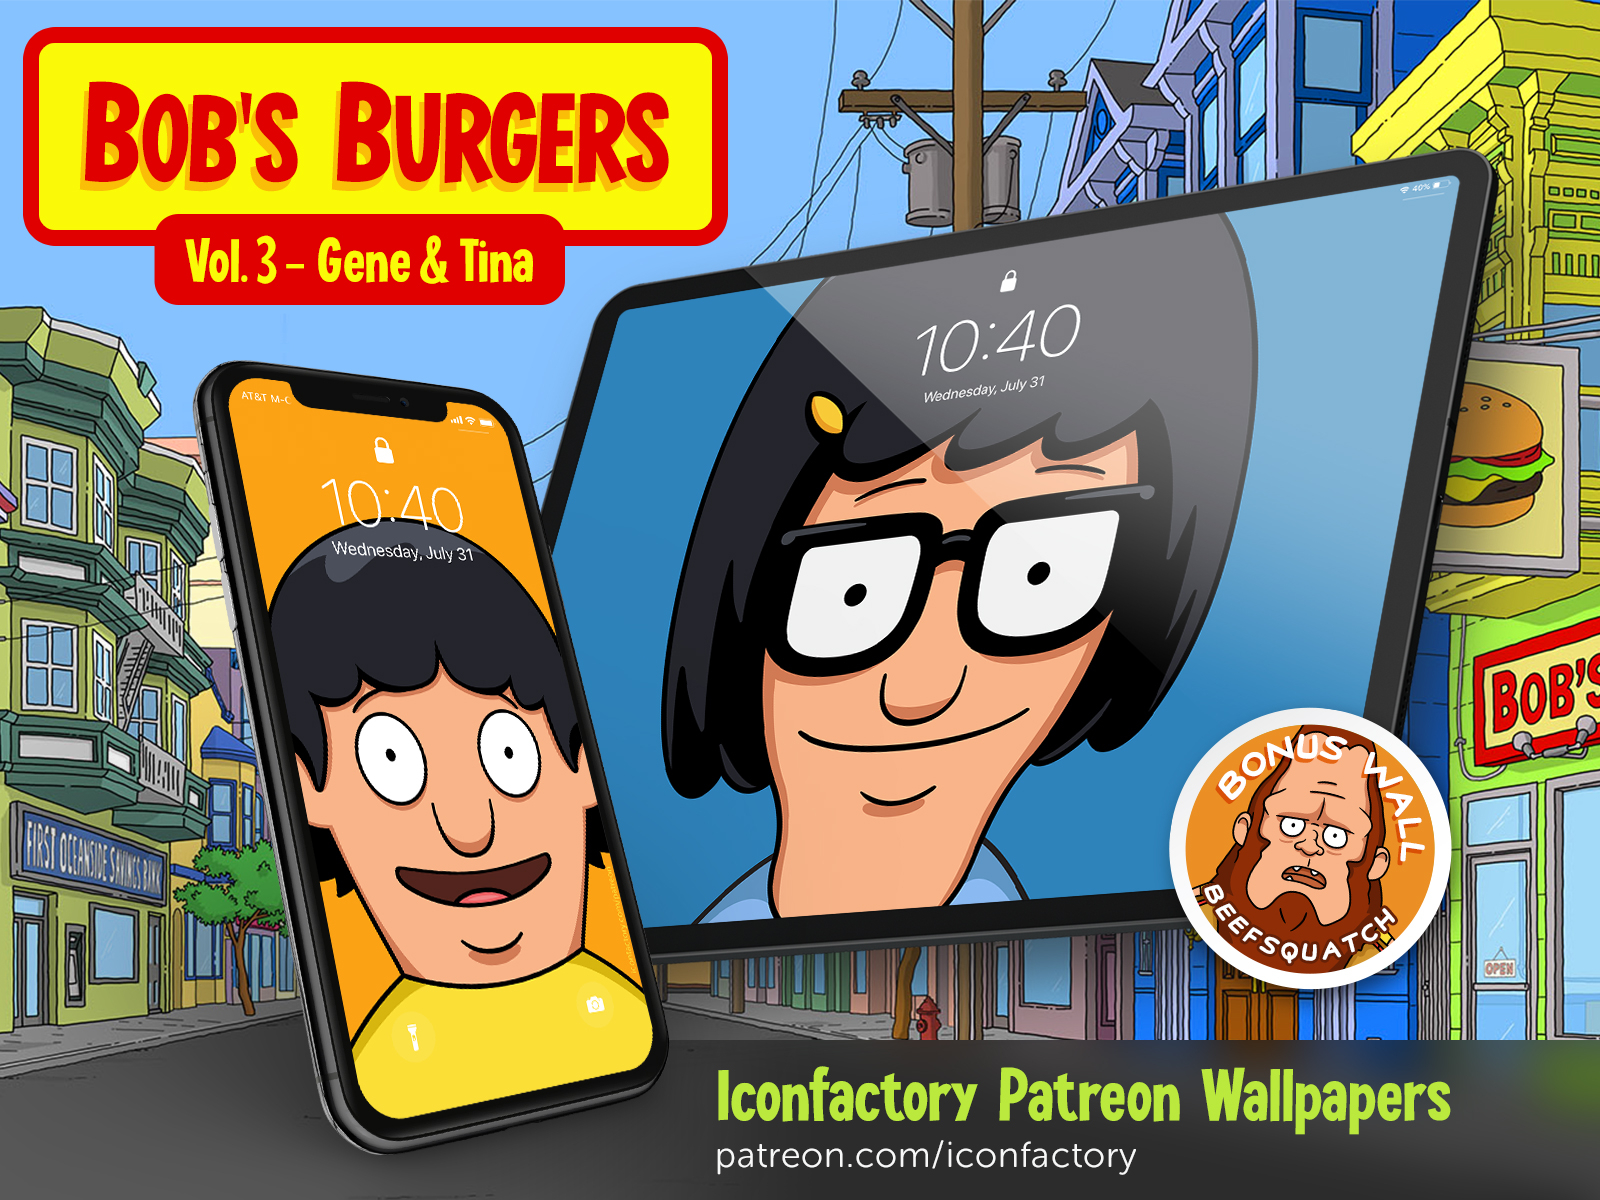 Pin by Kimberly Ann on Bobs Burgers  Bobs burgers Bobs burgers wallpaper  Bobs burgers funny